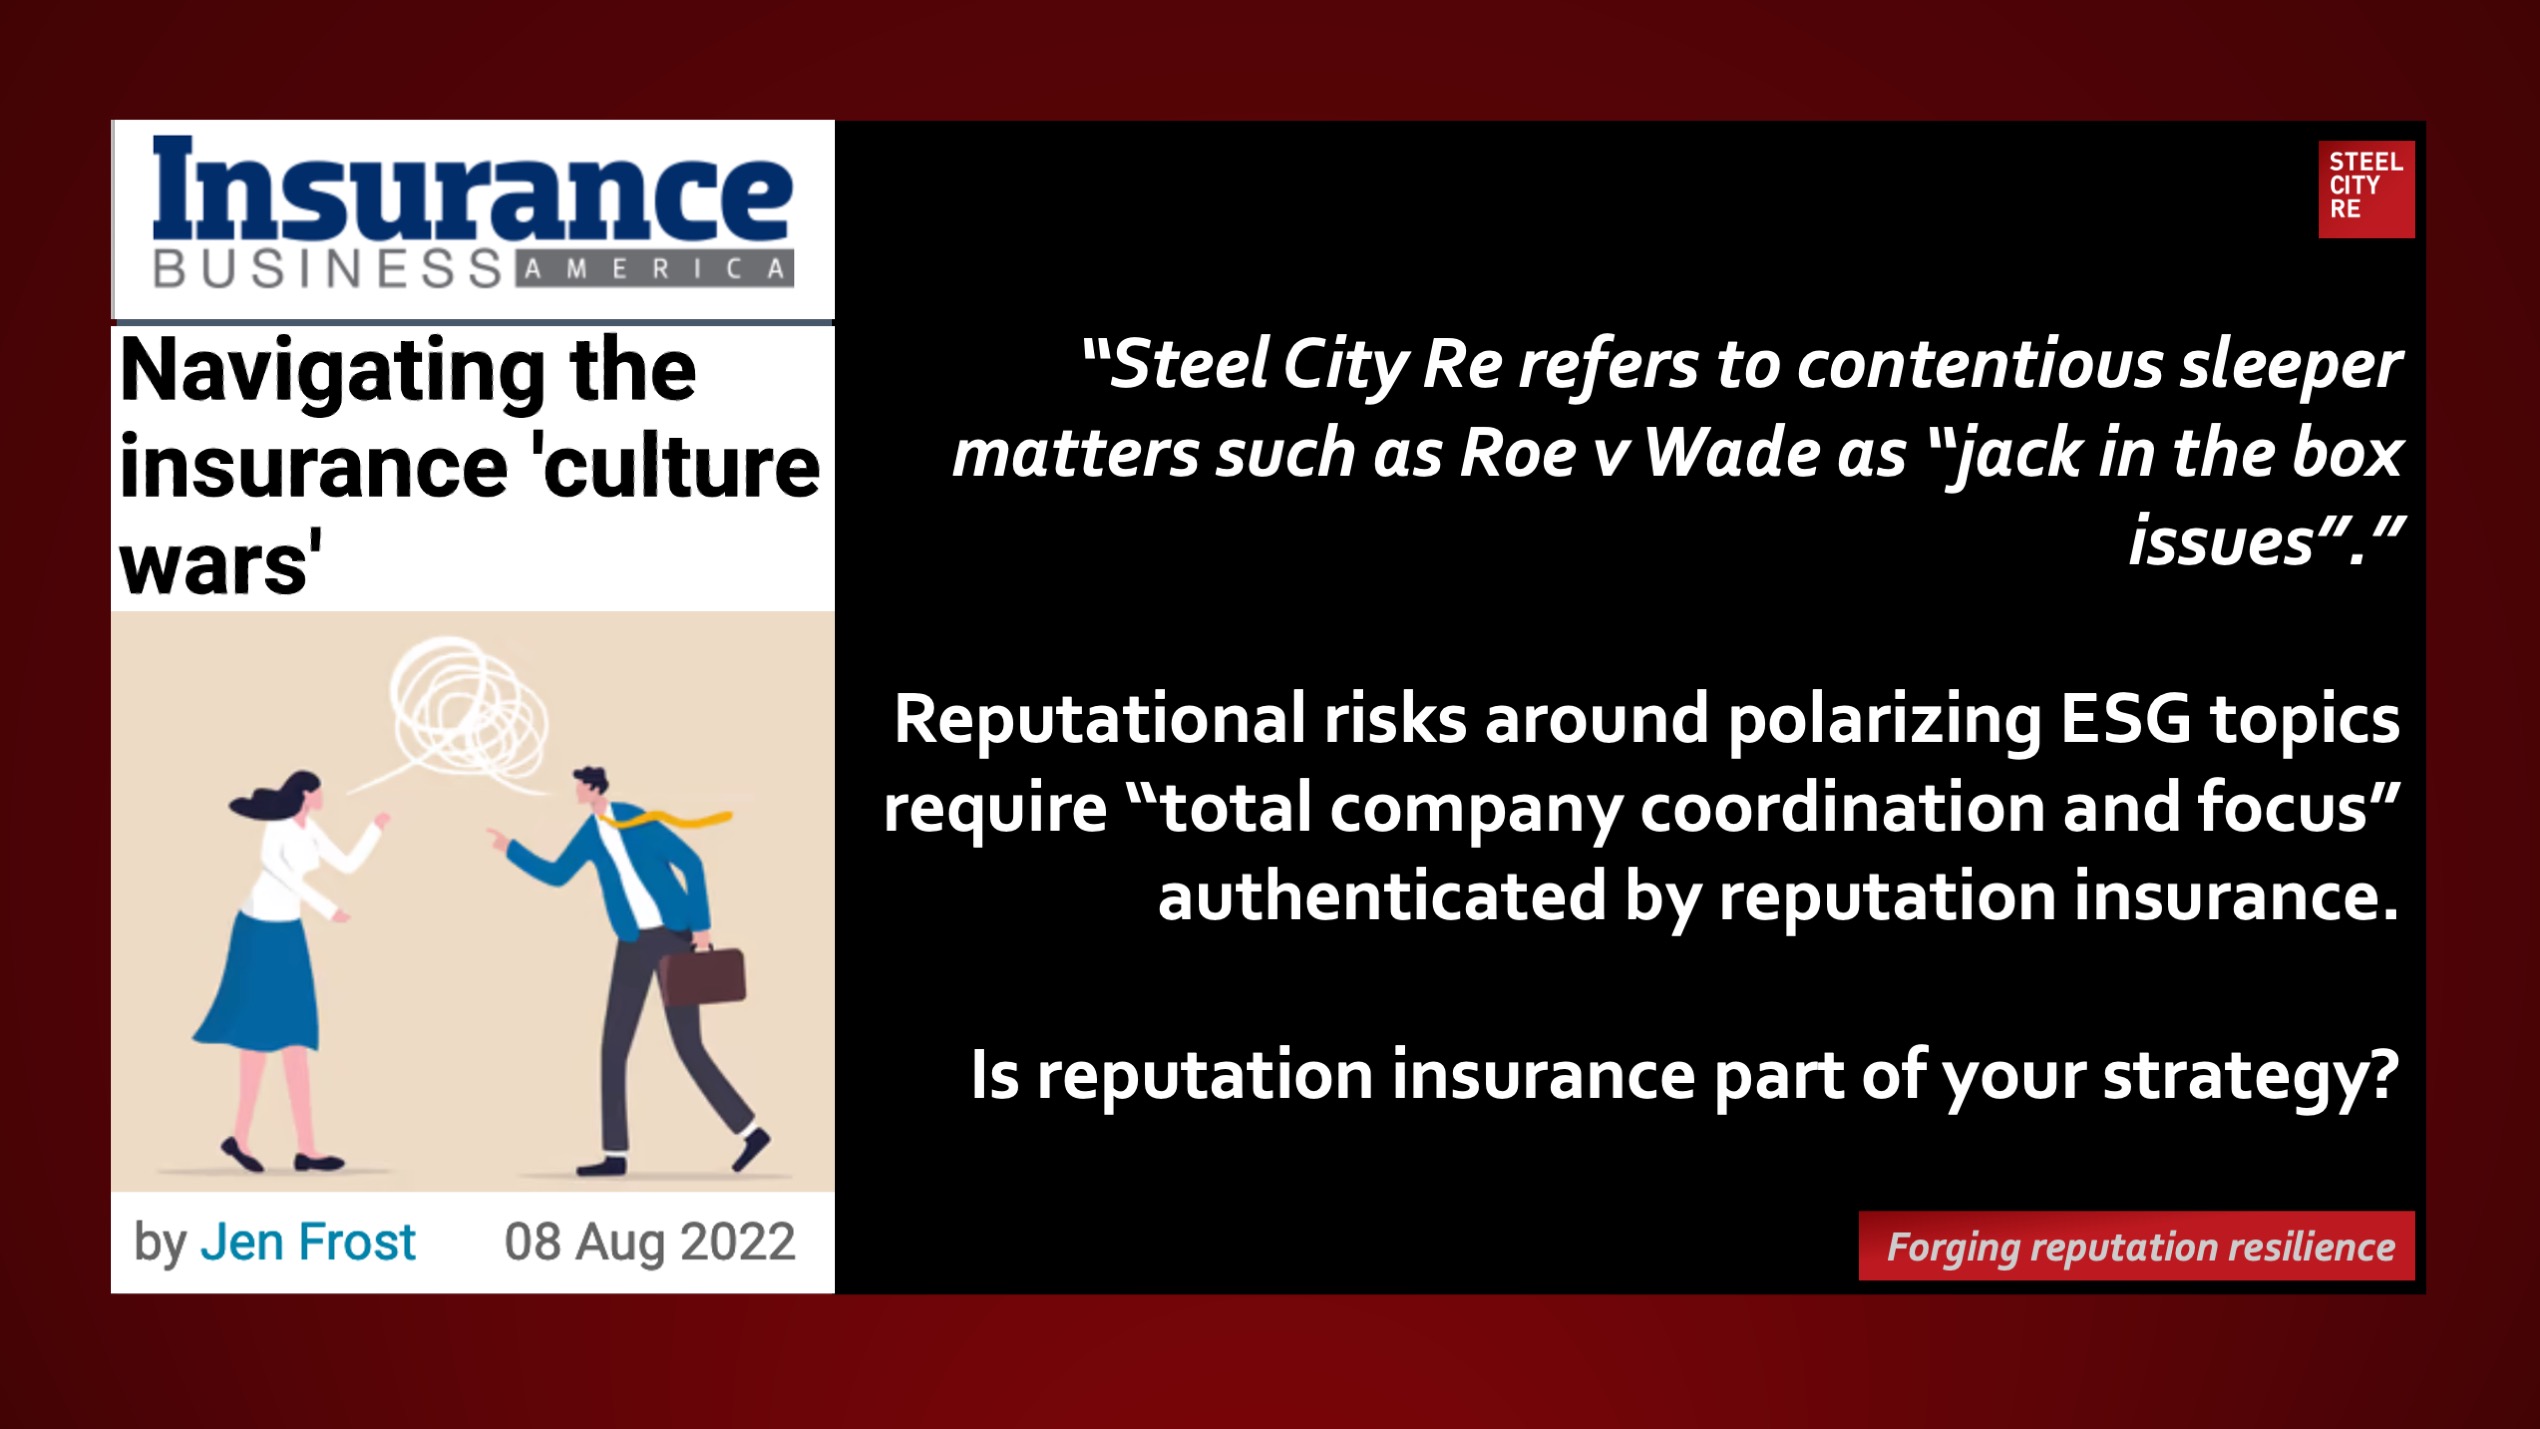 Reputation risk culture wars. Steel City Re refers to contentious sleeper matters such as Roe v Wade as “jack in the box issues”.